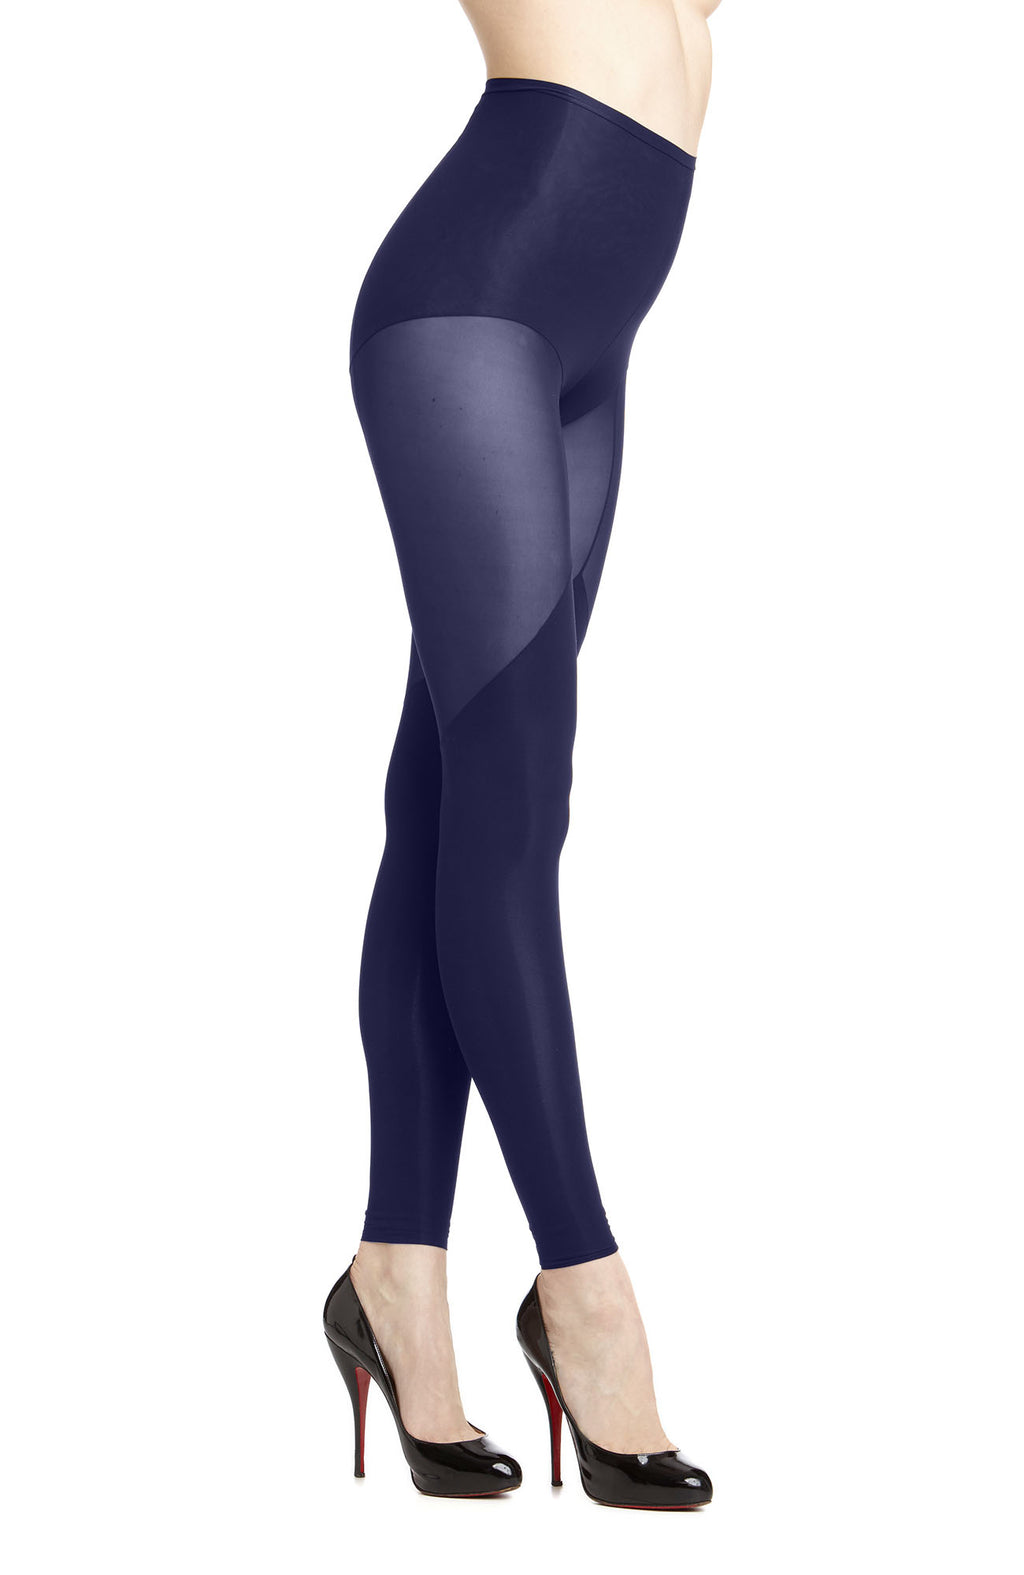  KLL Abstract Zigzag Navy Blue High Waist Yoga Pants for Women  Soft Women Compression Running Leggings X-Small : Clothing, Shoes & Jewelry